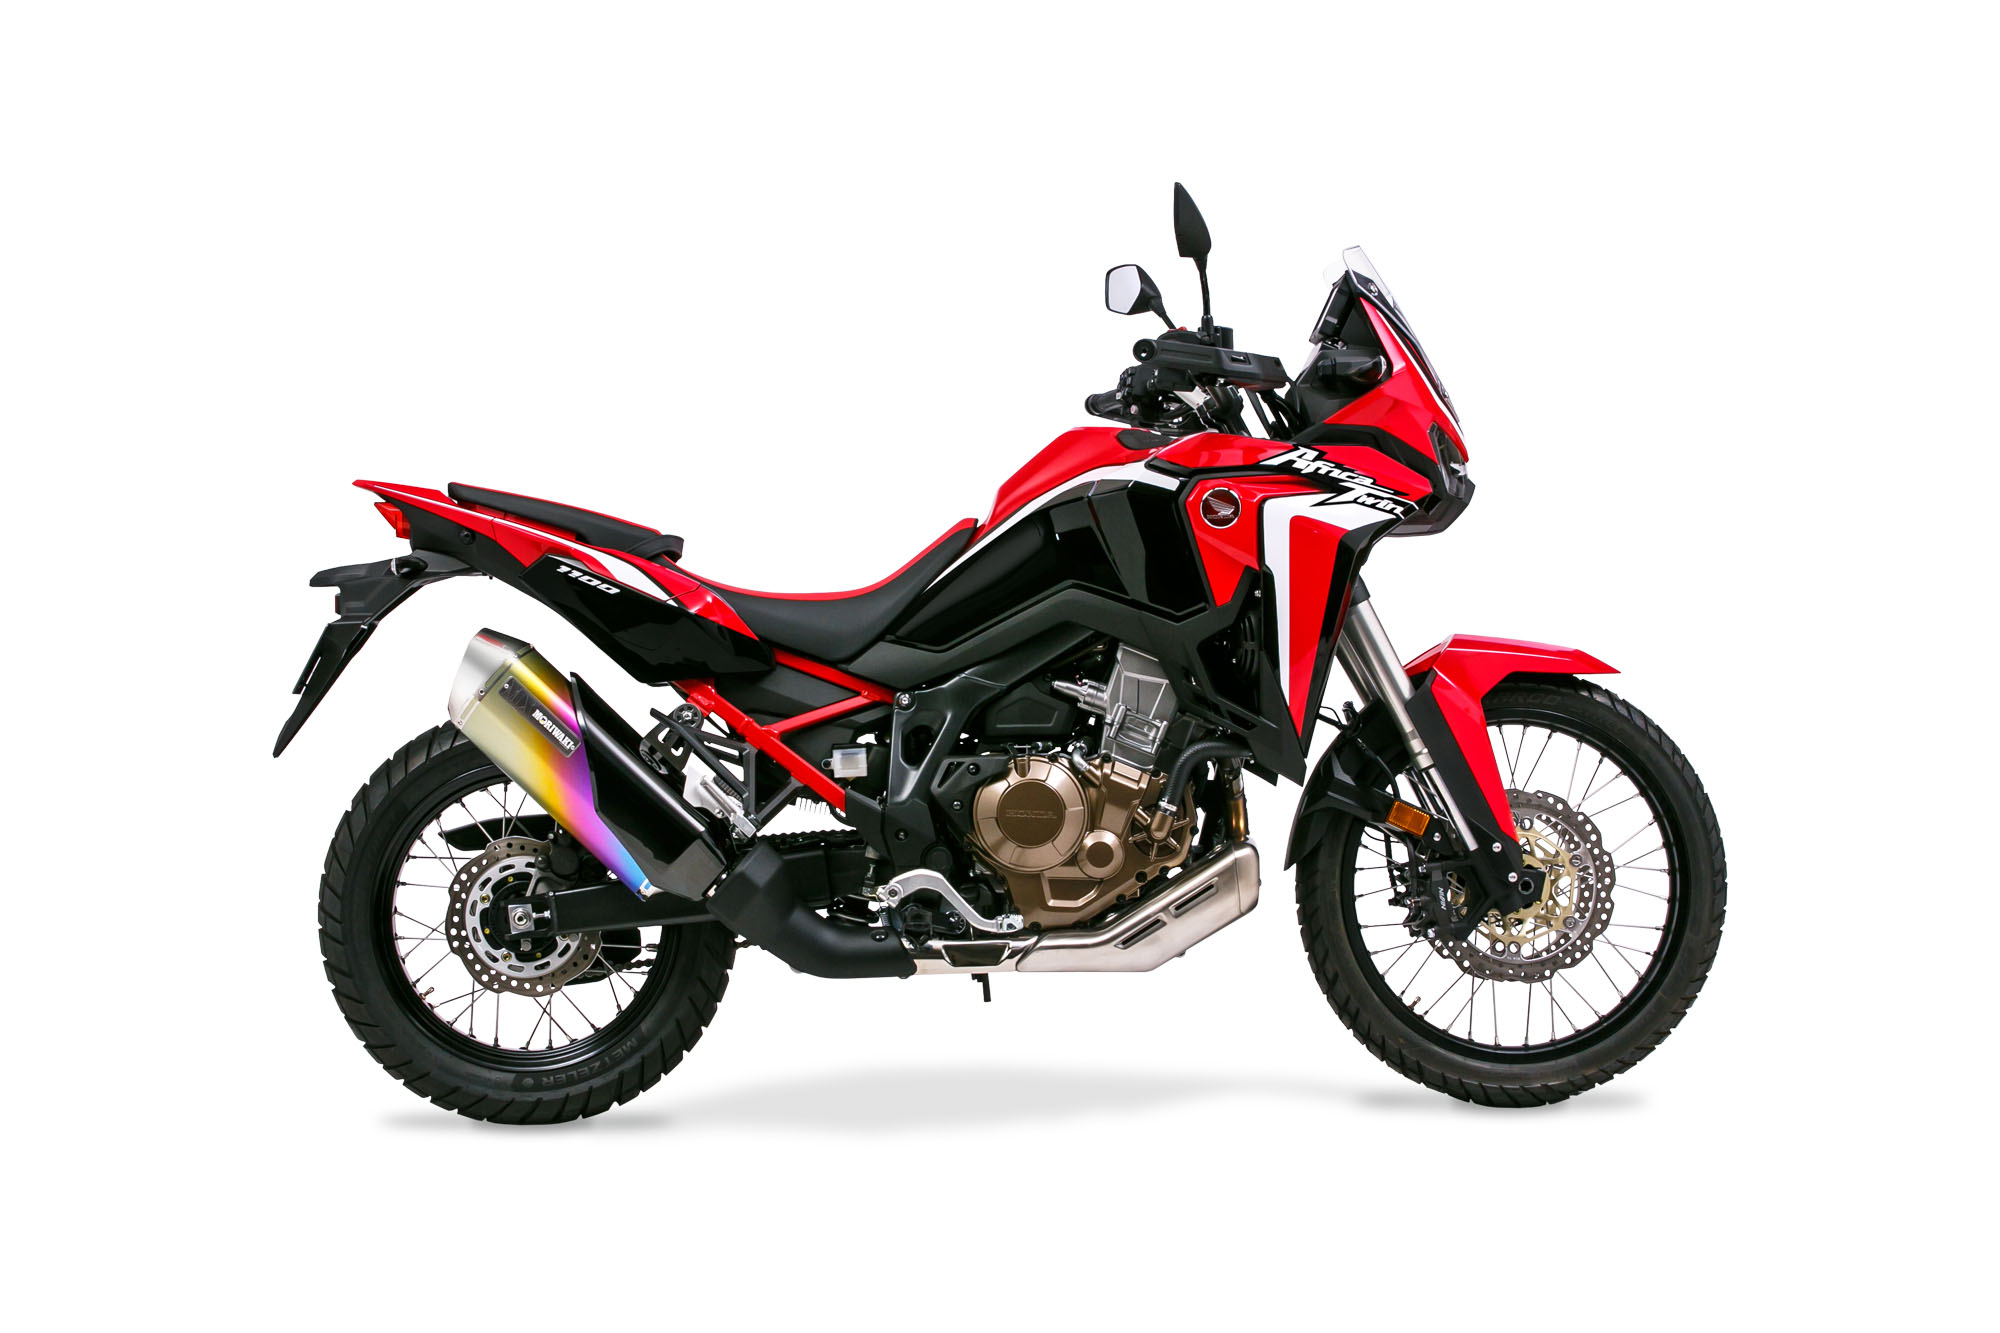 CRF1100L AfricaTwin 20-21
Slip-On Exhaust MX ANO